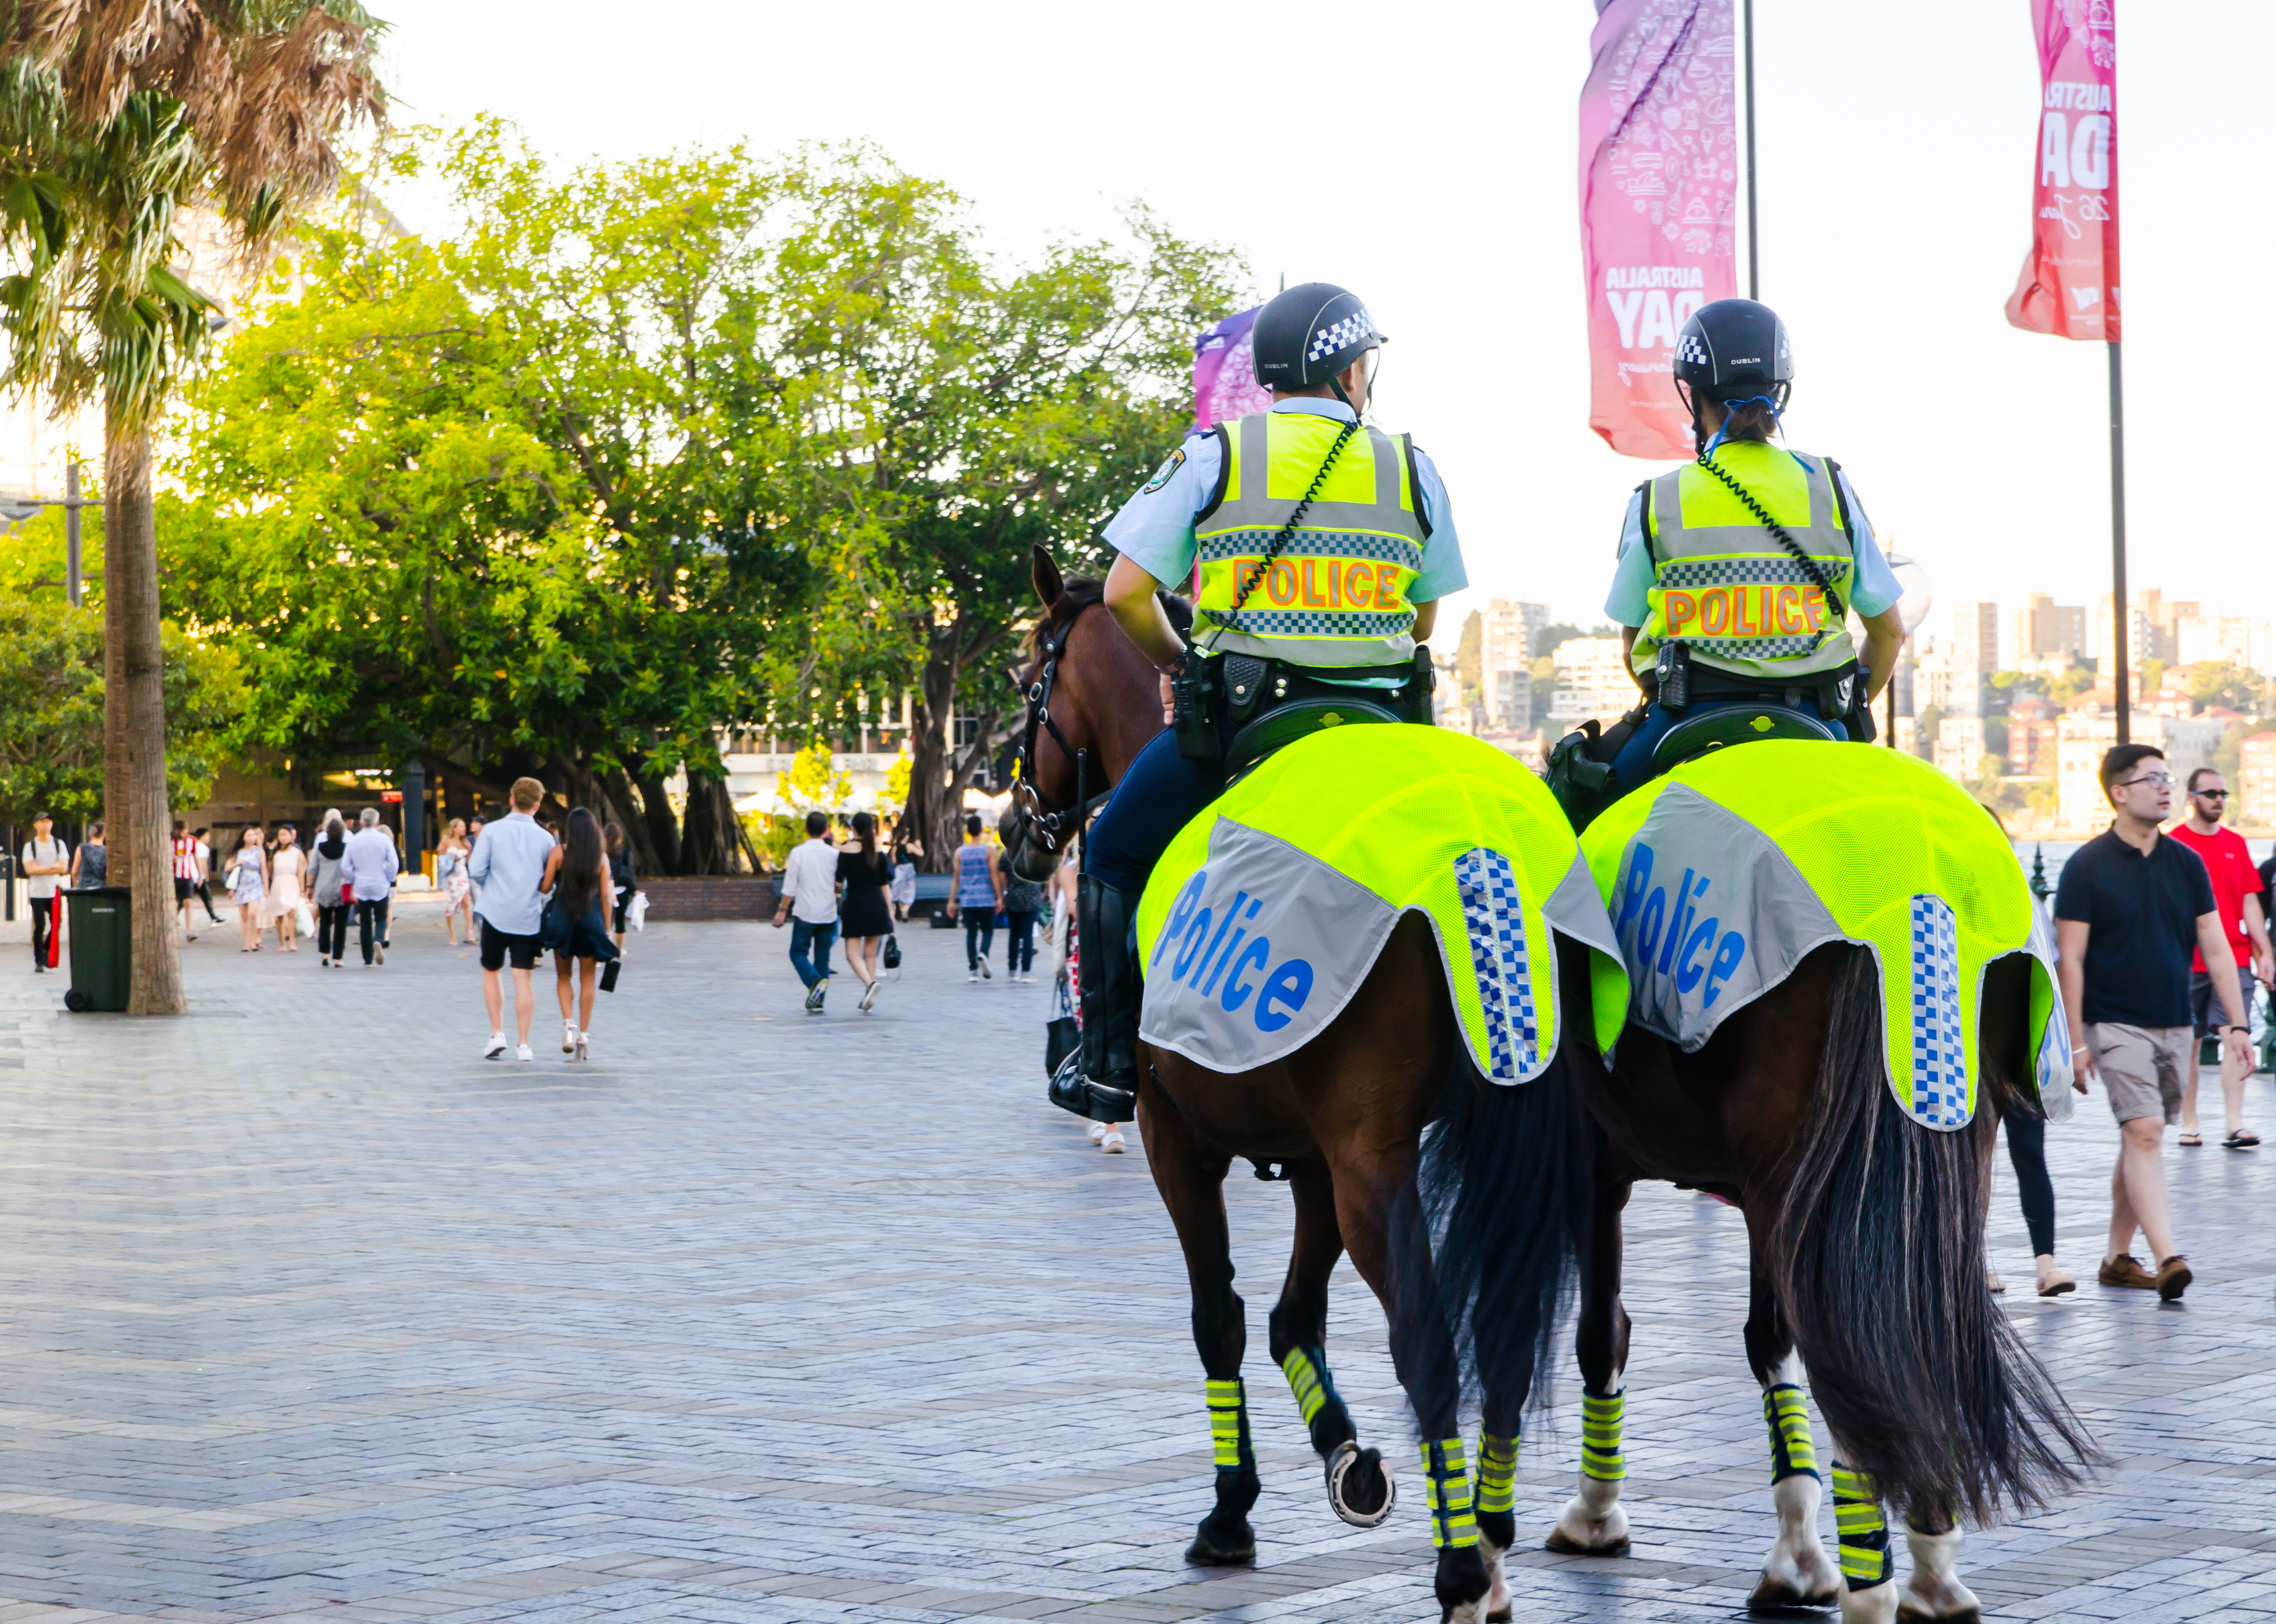 NSW Police on horses conduct illegal arrest